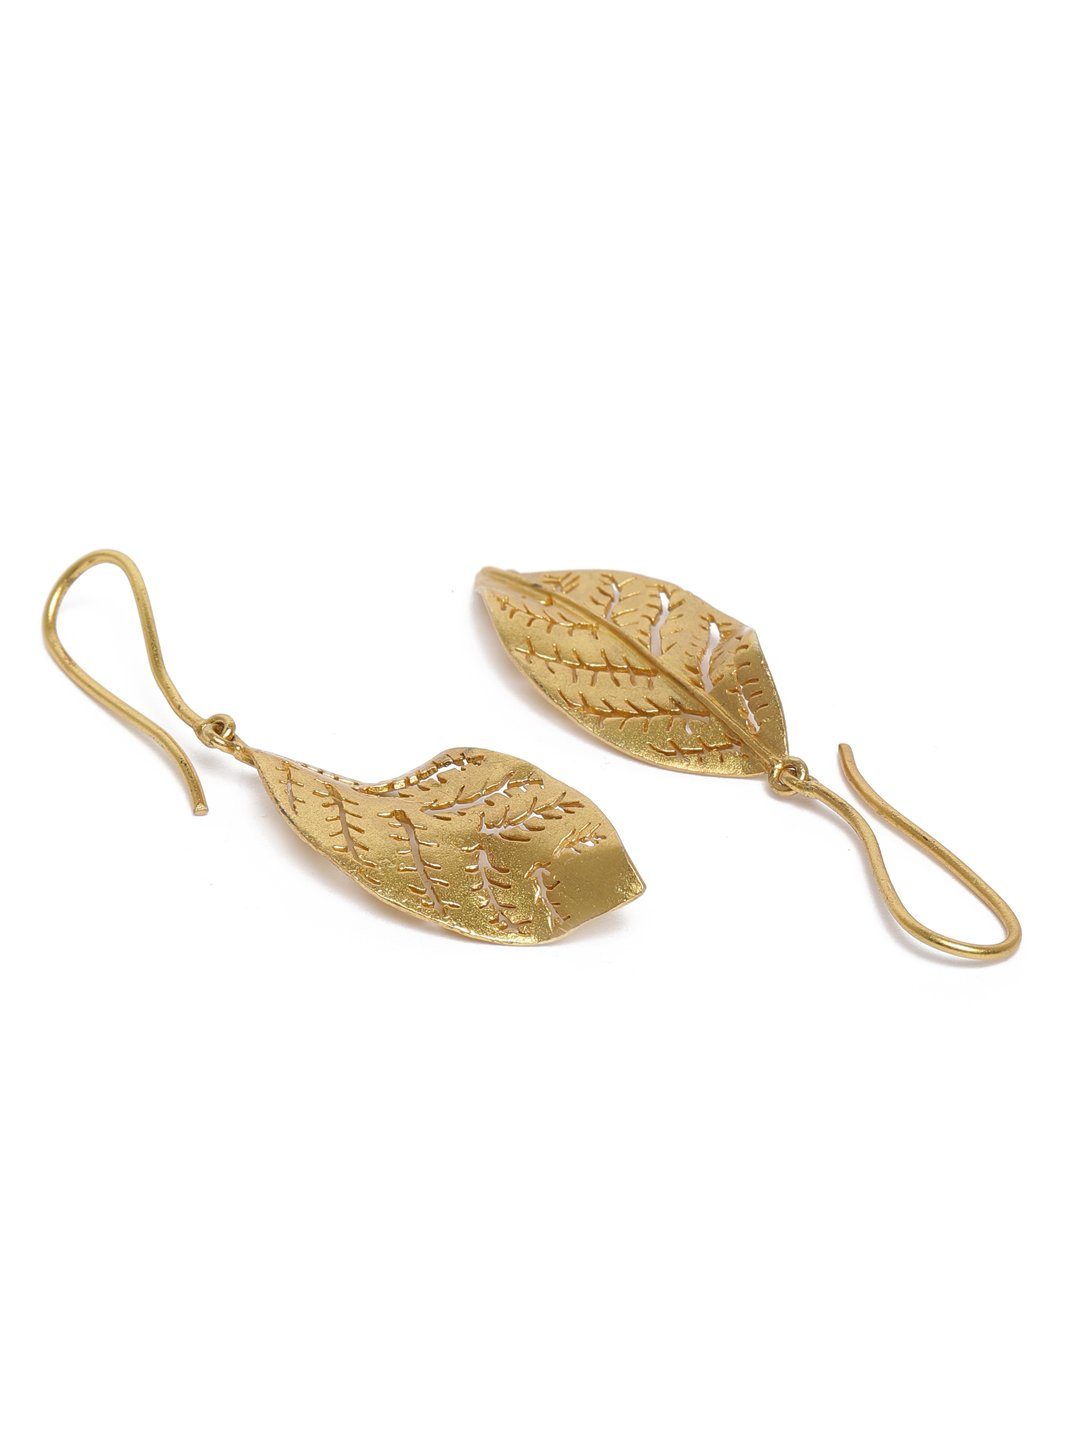 Silver Gold Plated Twisted Leaf Earring - By Unniyarcha - Original Manufacturers of Silver Jewelry, Gold Plated Jewellery, Fashion Jewellery and Personalized Soul Bands and Personalized Jewelry